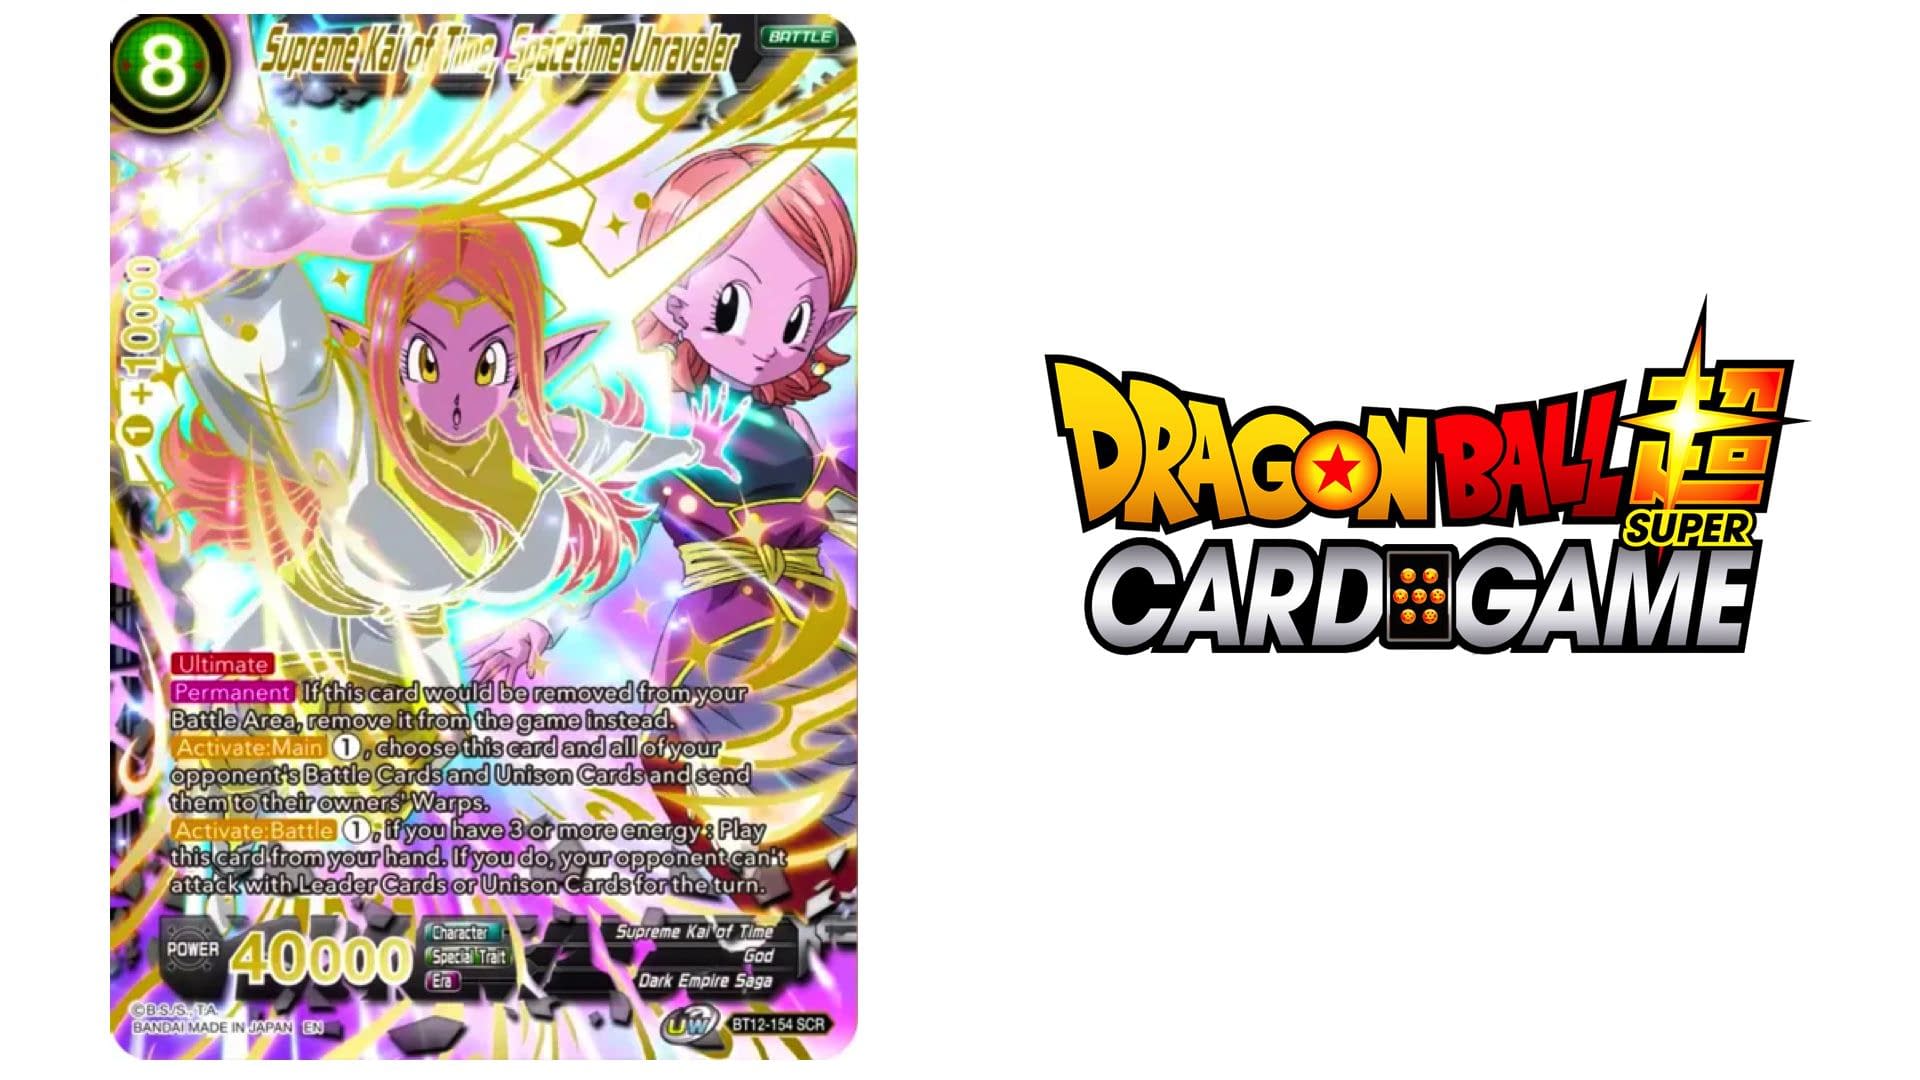 Bucchigiri Match) Last Banner Ever! Final Summons With 25% UR Rates & Tons  of Incredible Cards! 